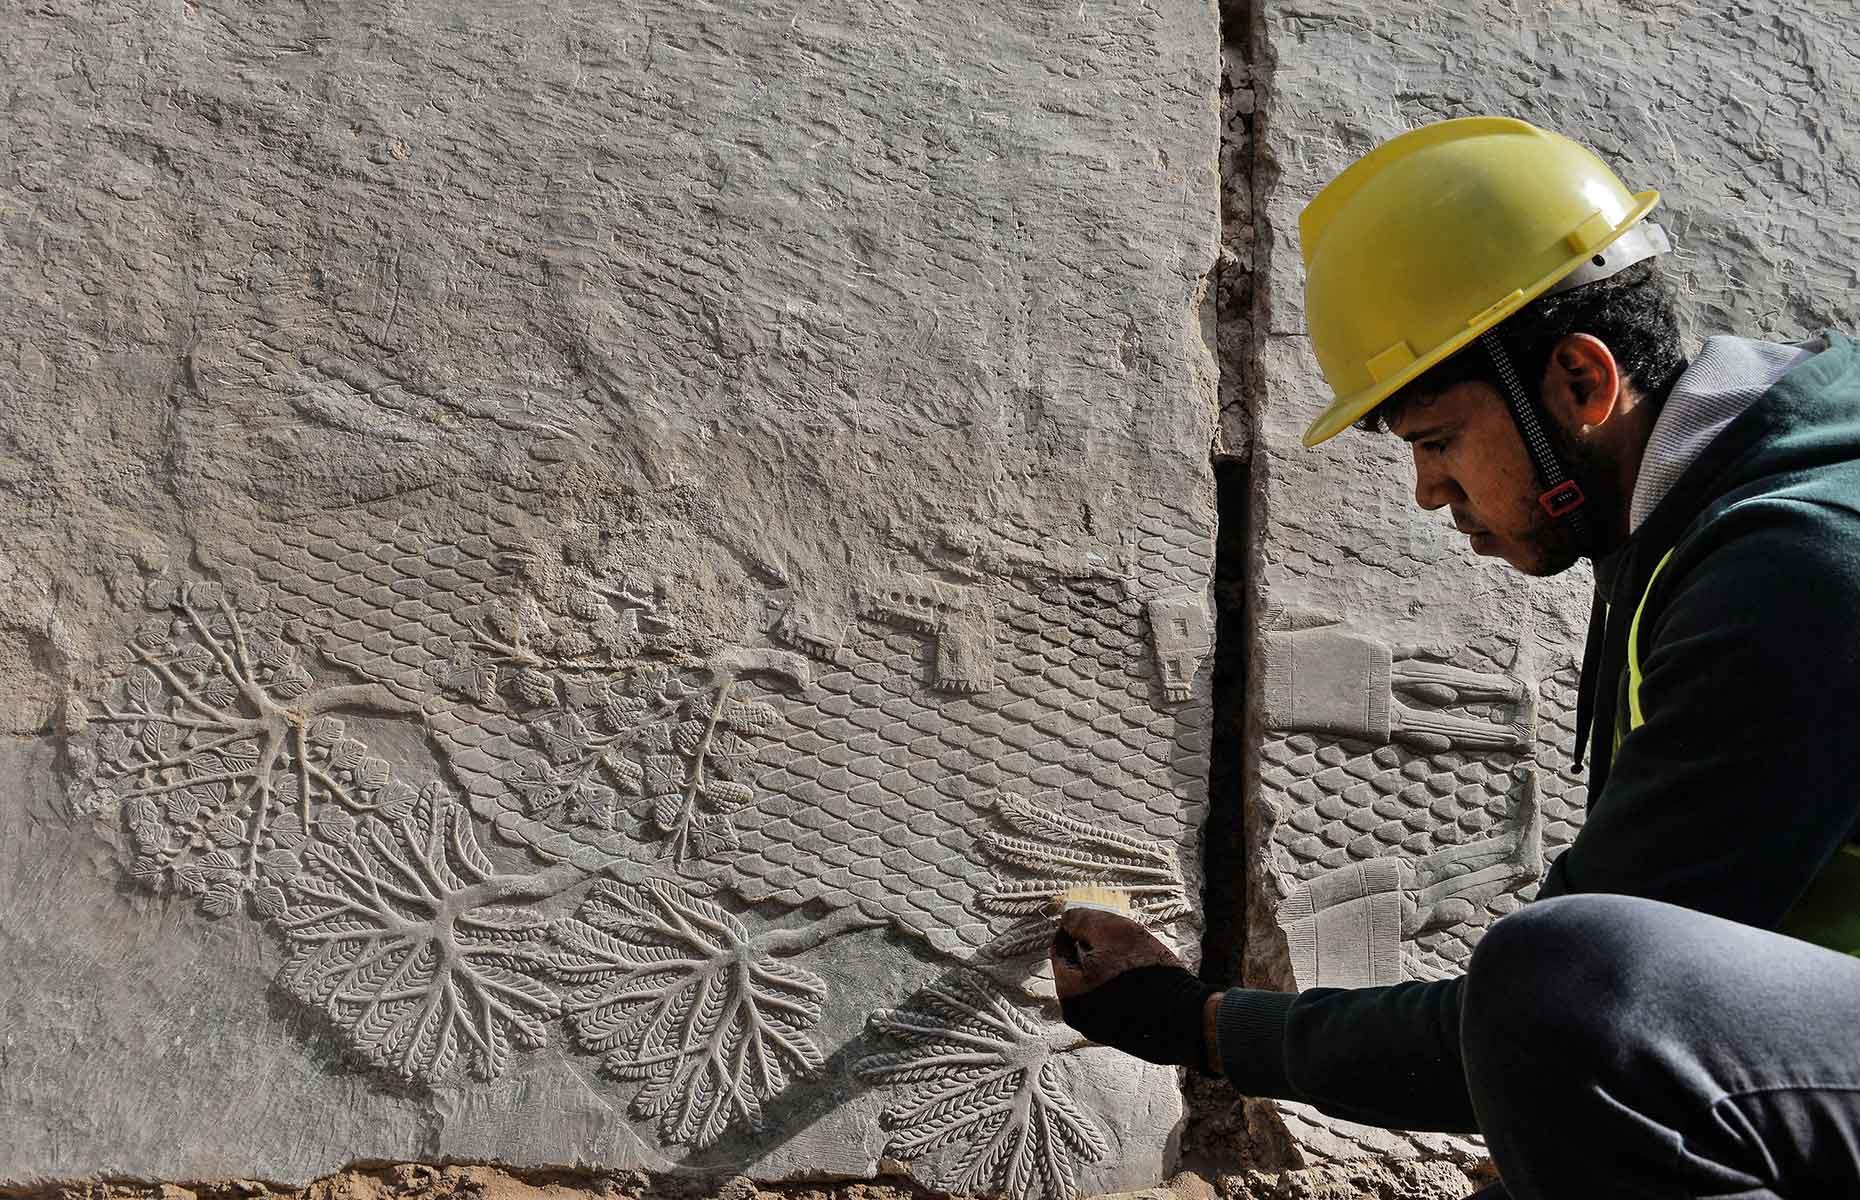 <p>Archaeologists have <a href="https://edition.cnn.com/style/article/iraq-archaeology-excavation-isis-intl-scli/index.html">unearthed Assyrian marble reliefs</a> dating back 2,700 years in Mosul, northern Iraq. The team were rebuilding the Mashki Gate (Gate of God), originally built around 700 BC (then Nineveh), reconstructed in the 1970s but destroyed by ISIS militants in 2016. The astonishingly rare find included seven slabs of marble decorated with ornate carvings of palm trees, pomegranates and Assyrian soldiers firing arrows, and was part of a previously hidden room in King Sennacherib's palace. Buried for millenia, their beautiful preservation means archaeologists can now dig deeper into the Neo-Assyrian Empire's history. </p>